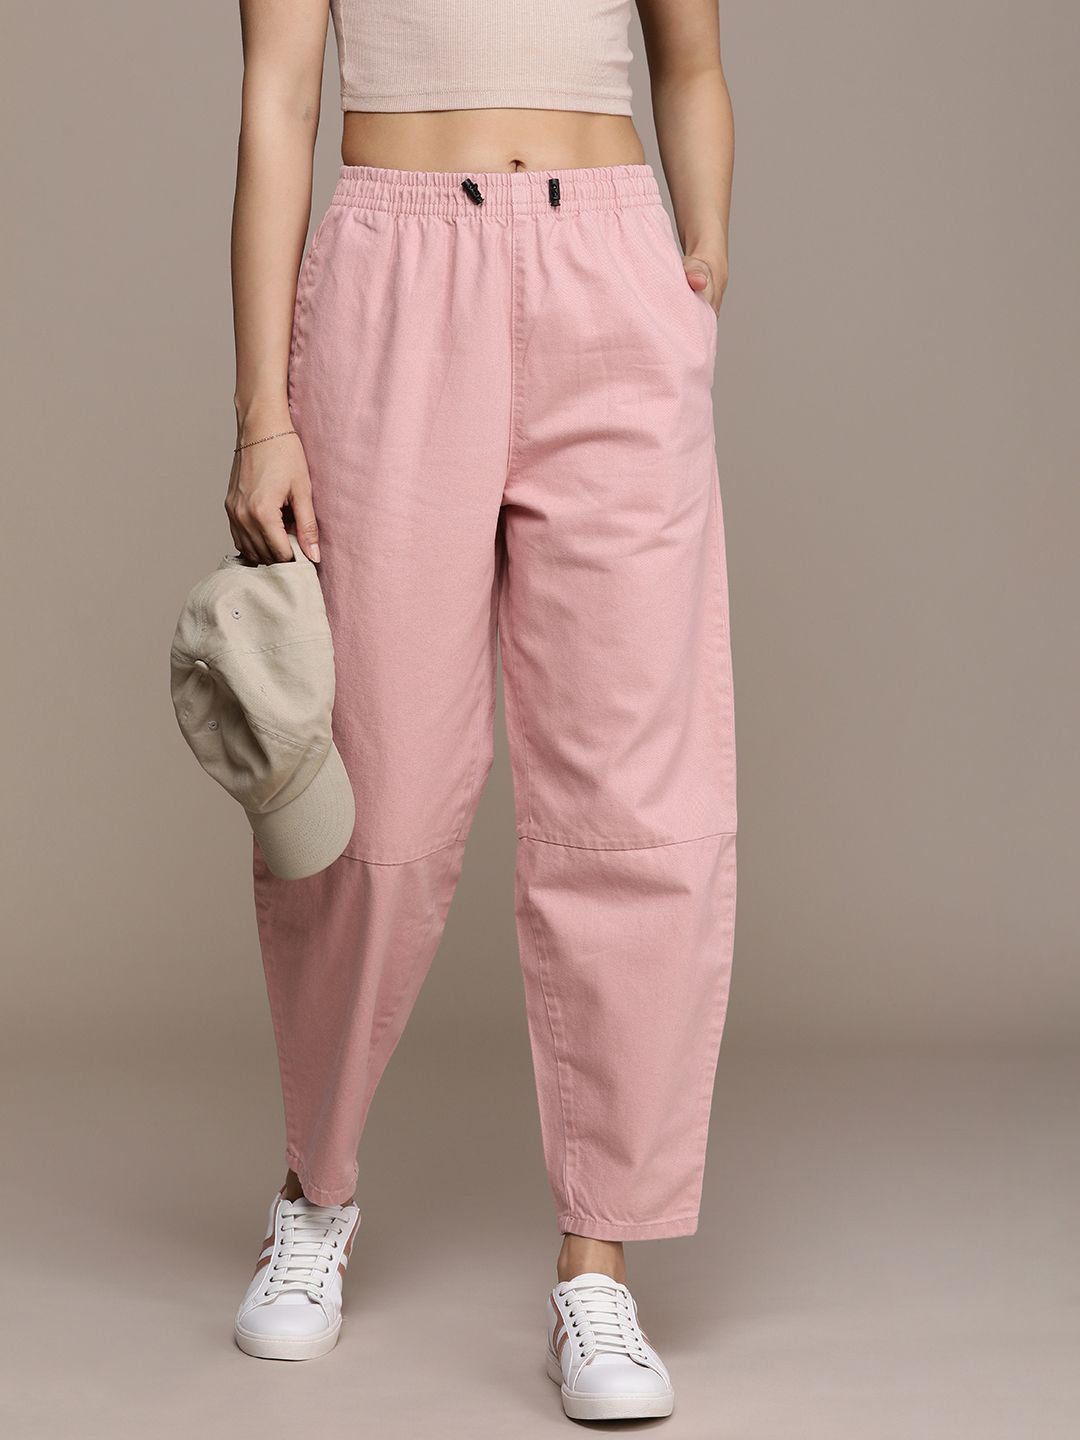 The Roadster Life Co. Women Pure Cotton Solid Trouser Price in India